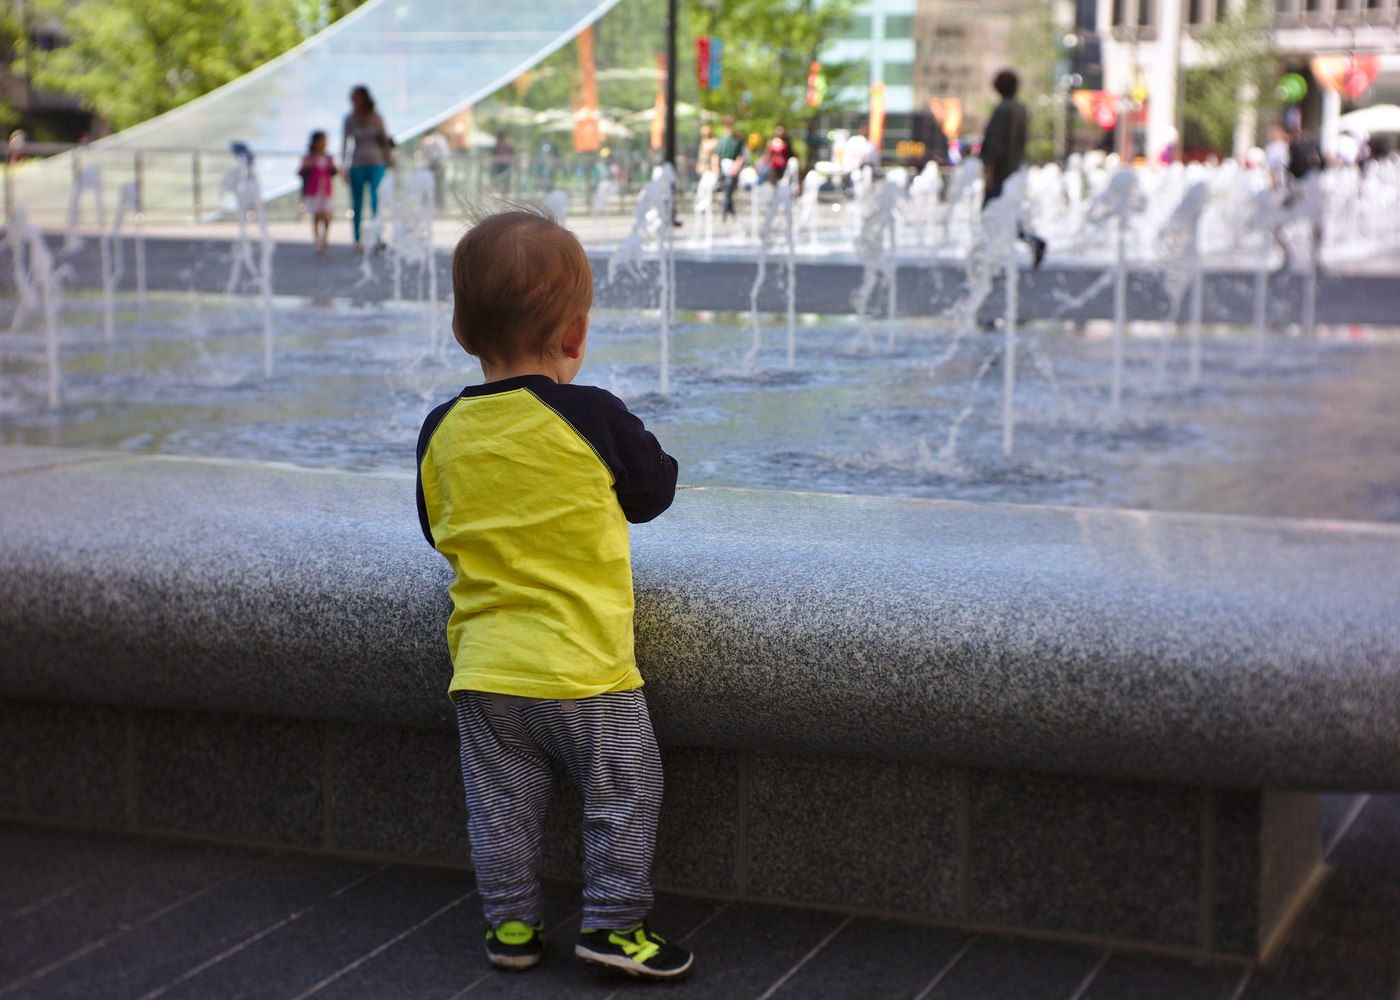 10 Fun, Budget-Friendly Activities Your Family Can Enjoy in Philadelphia This August